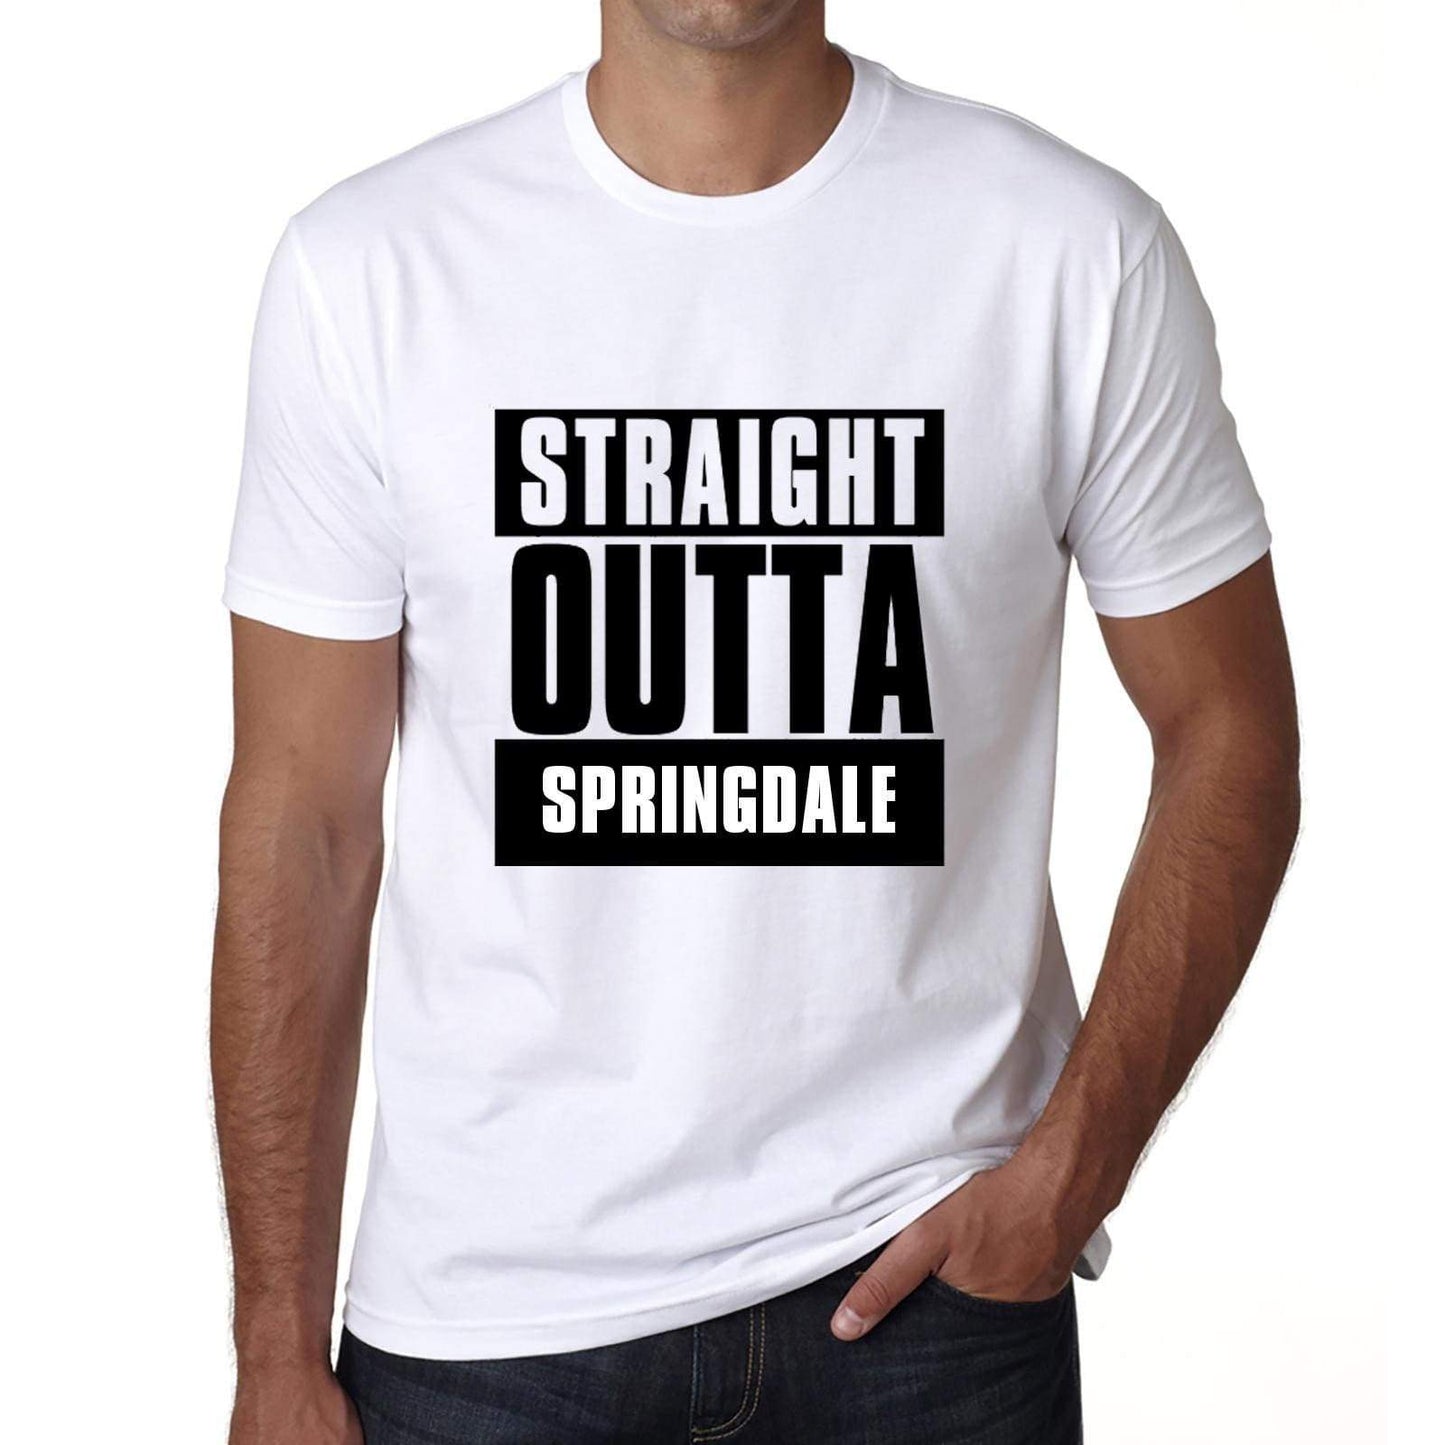 Straight Outta Springdale Mens Short Sleeve Round Neck T-Shirt 00027 - White / S - Casual